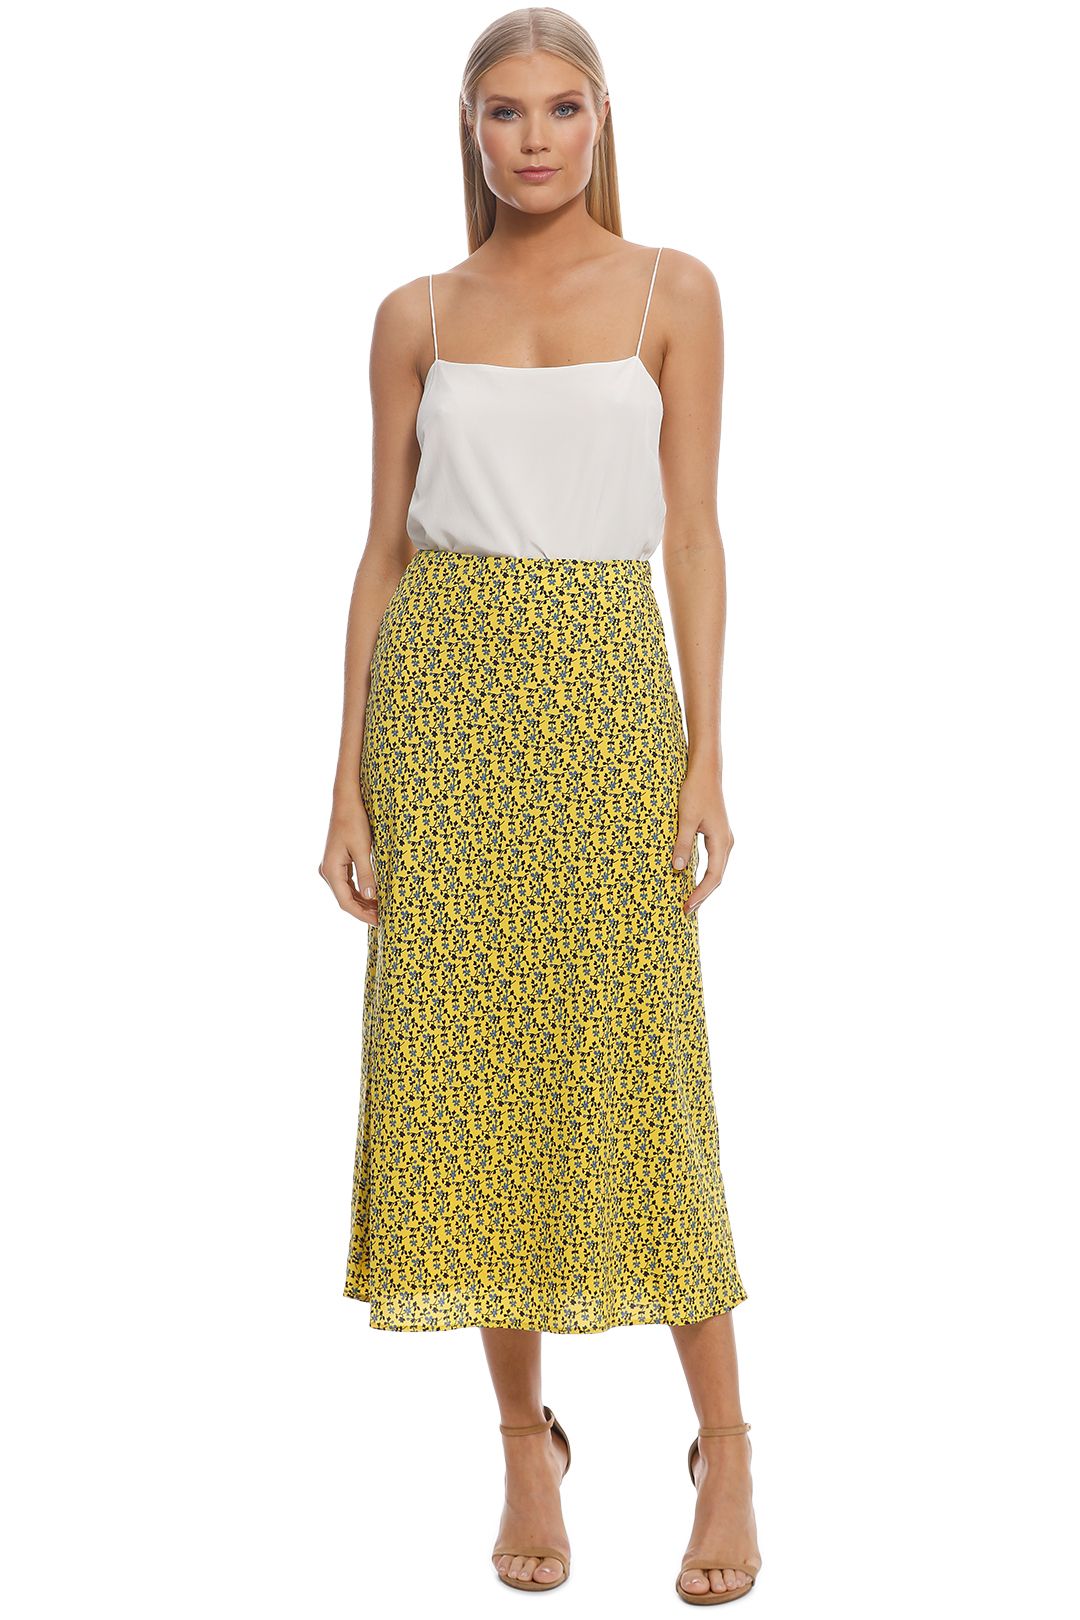 CMEO Collective - Sanguine Skirt - Yellow Floral - Front